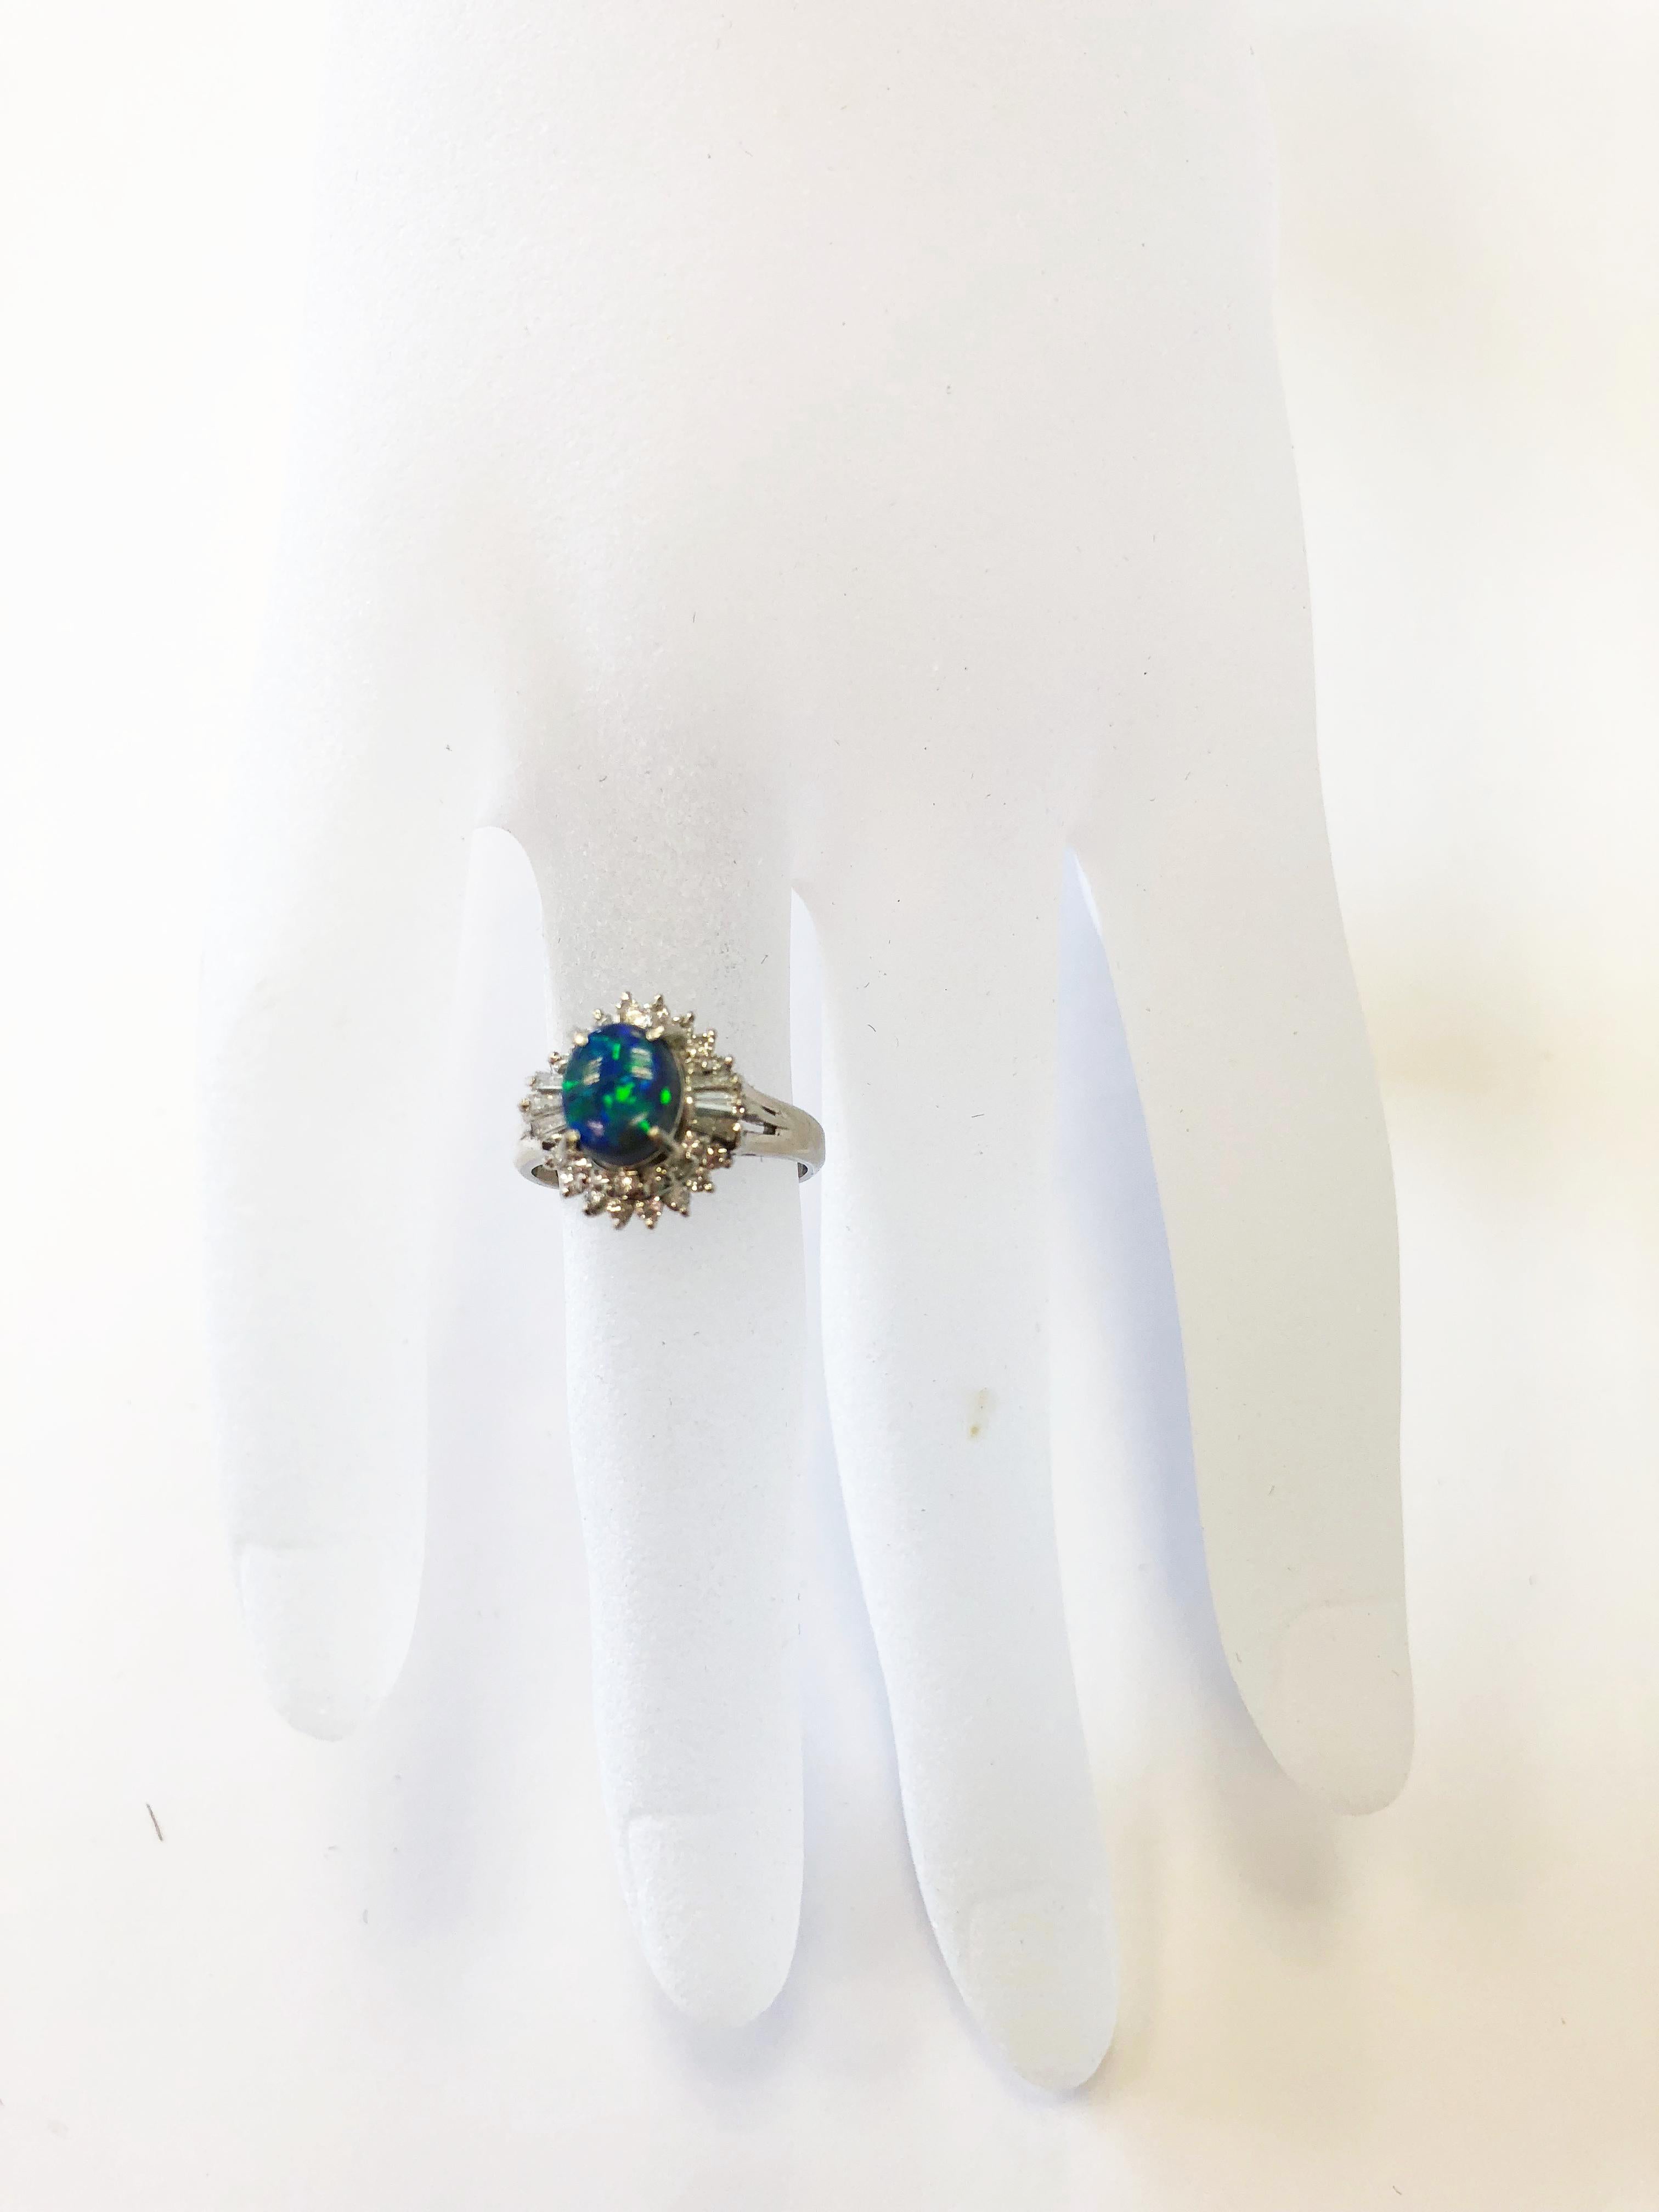 Stunning blue green opal oval weighing 0.93 carats with 0.53 carats of white good quality diamond rounds in a handmade platinum mounting.  Ring size 5.  Classic design with an eye catching stone.